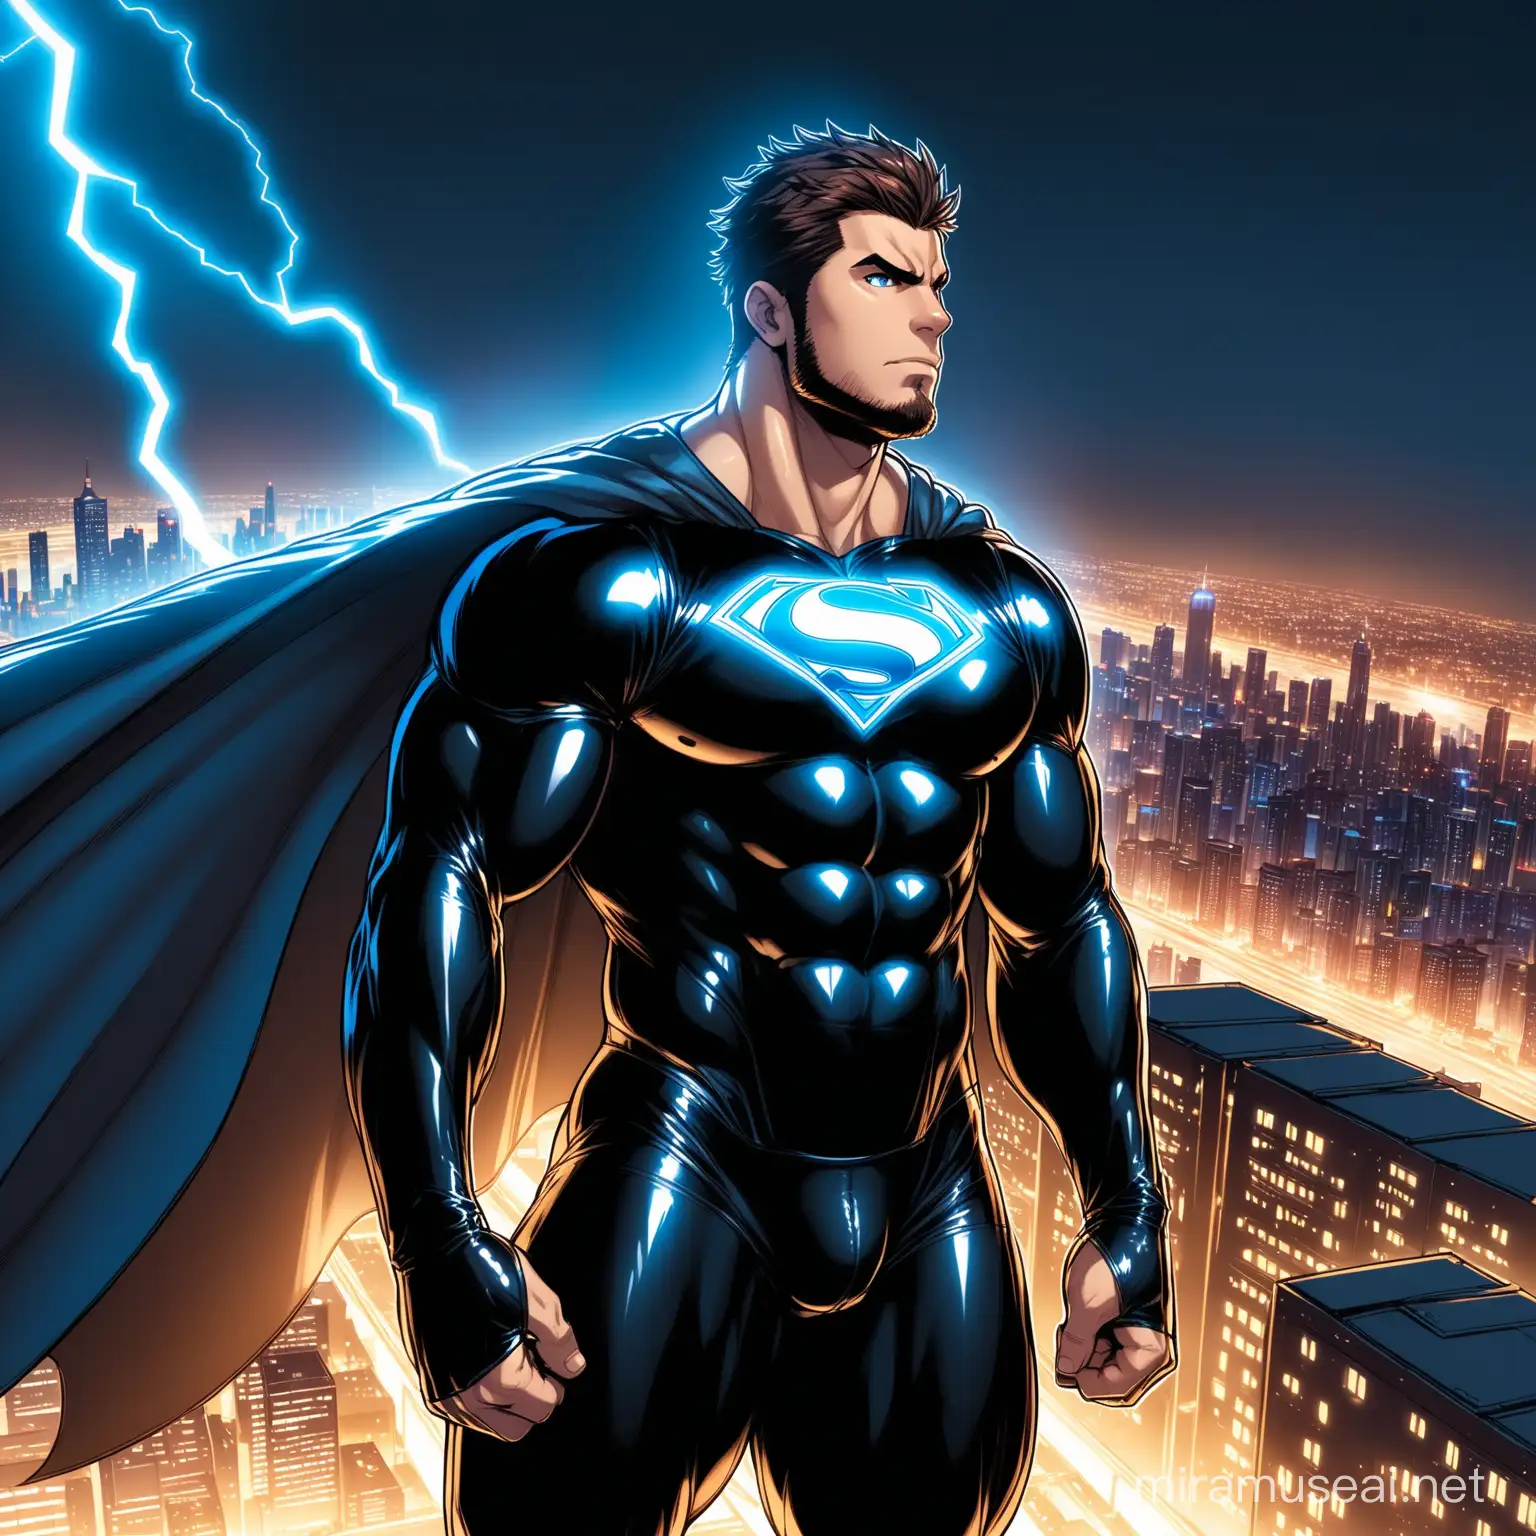 Powerful Bara Superhero with Electric Abilities in Cityscape